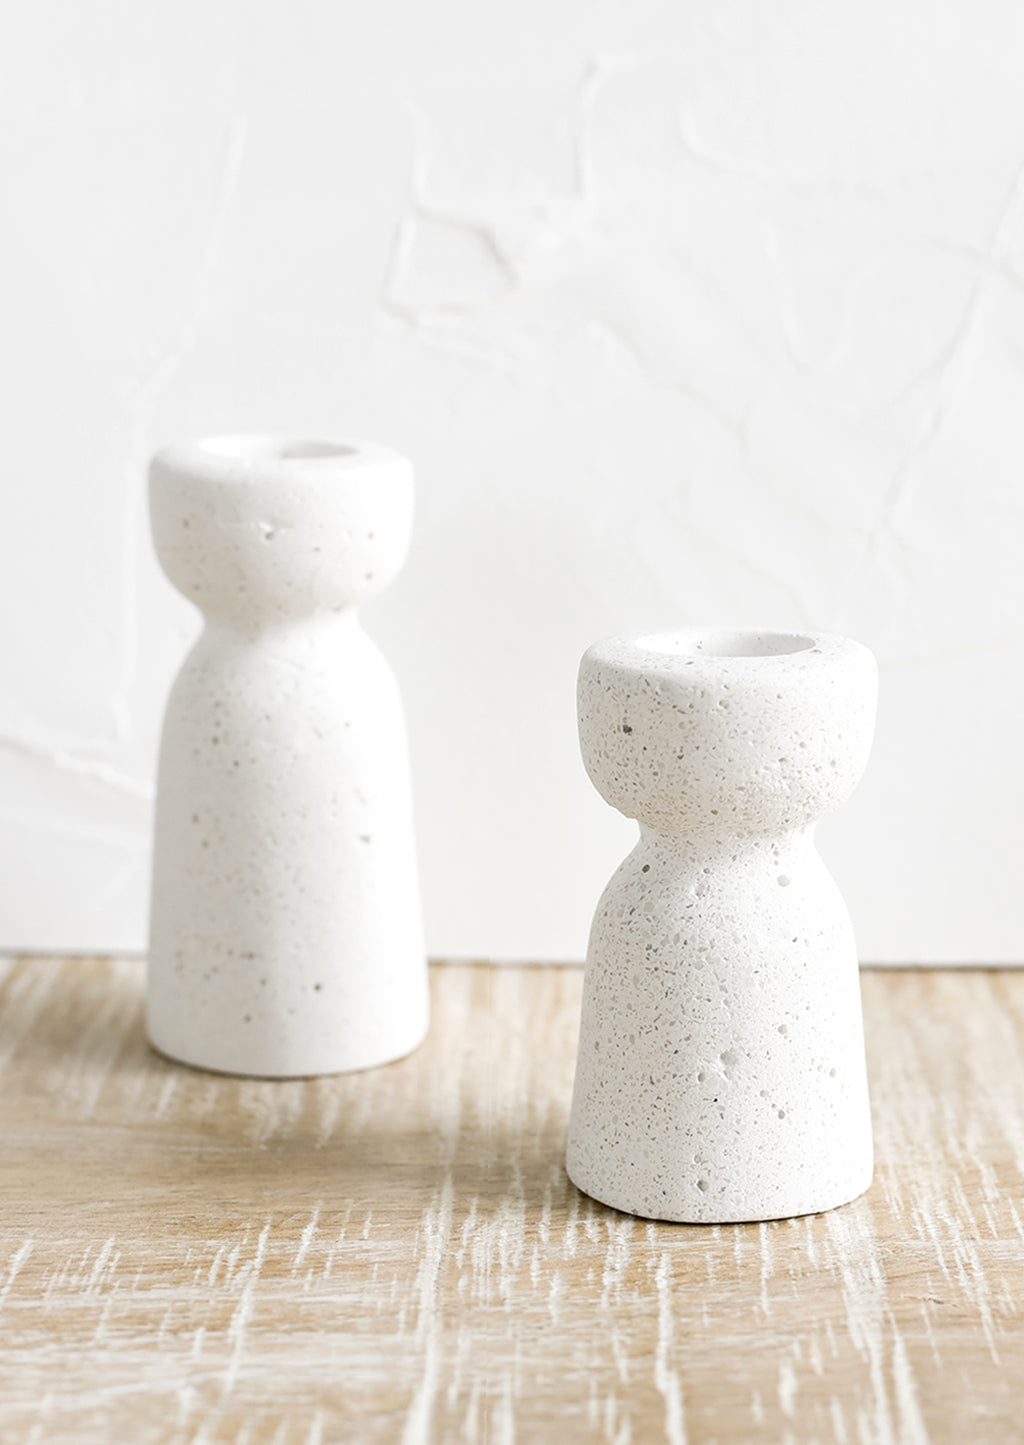 Short / White: Two short and tall white concrete candleholders with pumice-like texture.